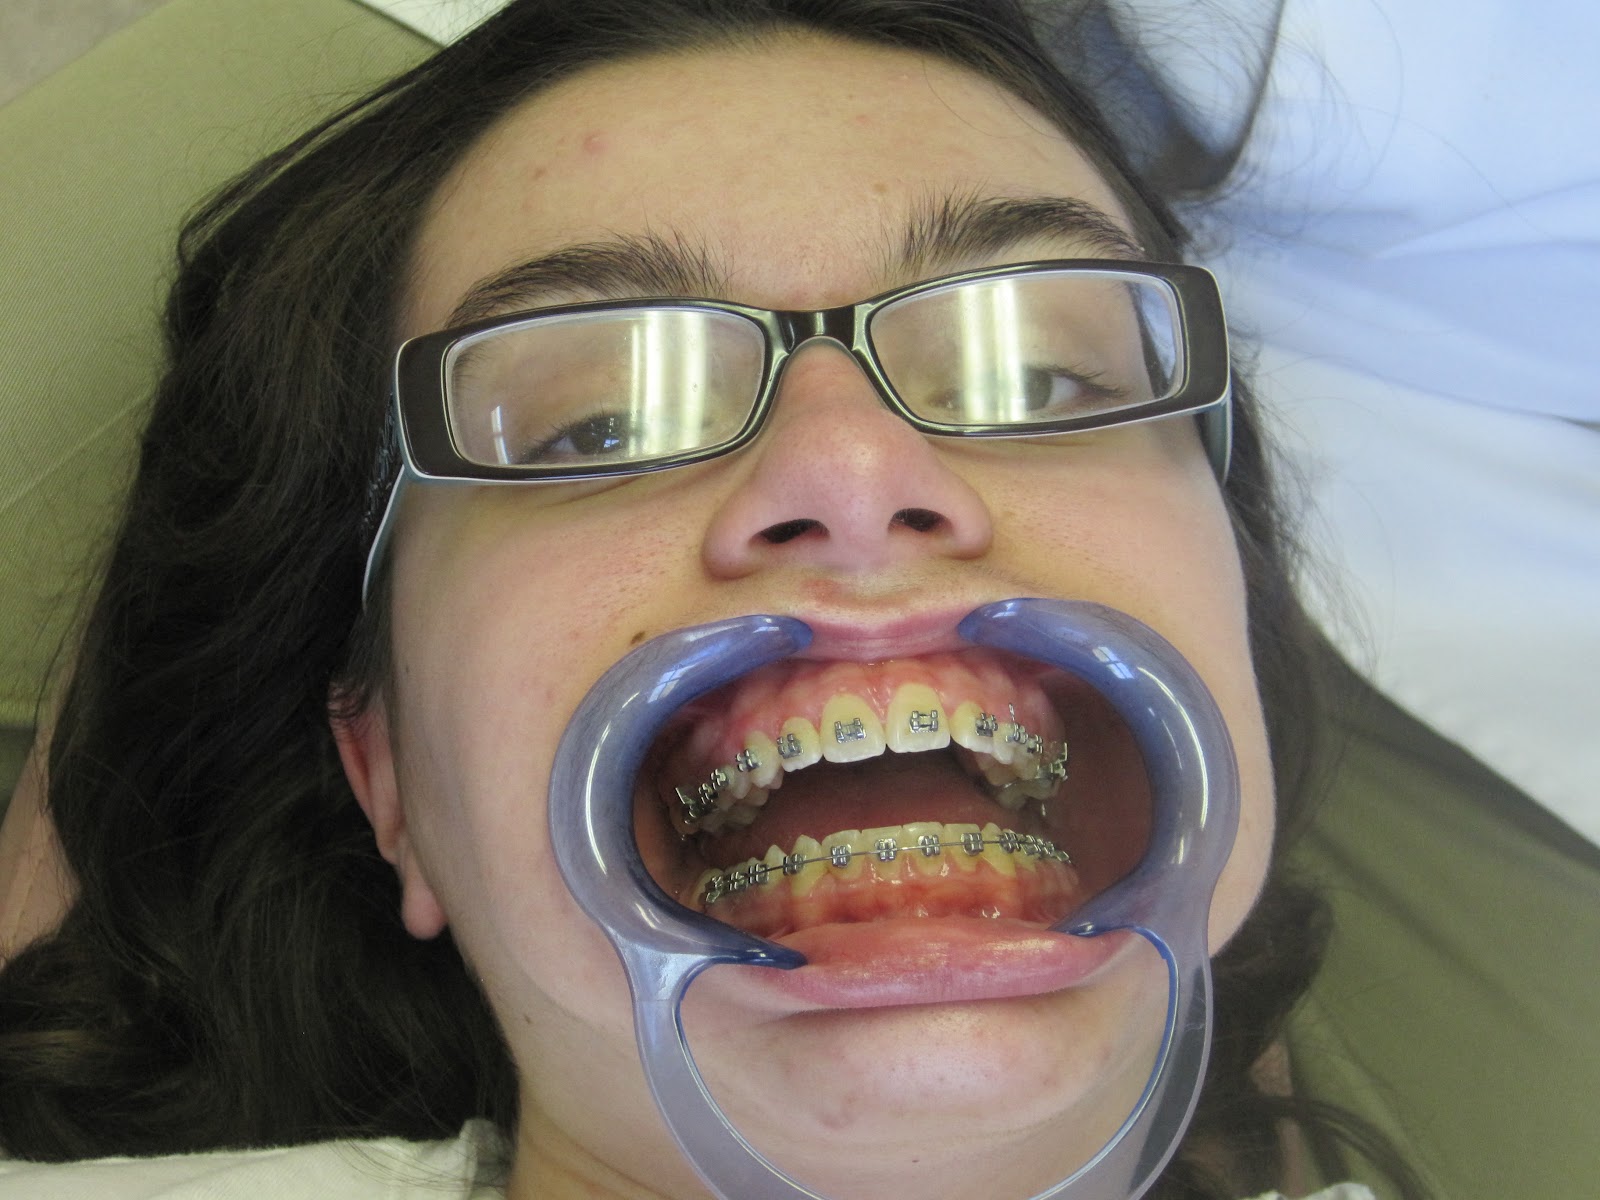 They are holding her mouth wide open to get at all her braces. 